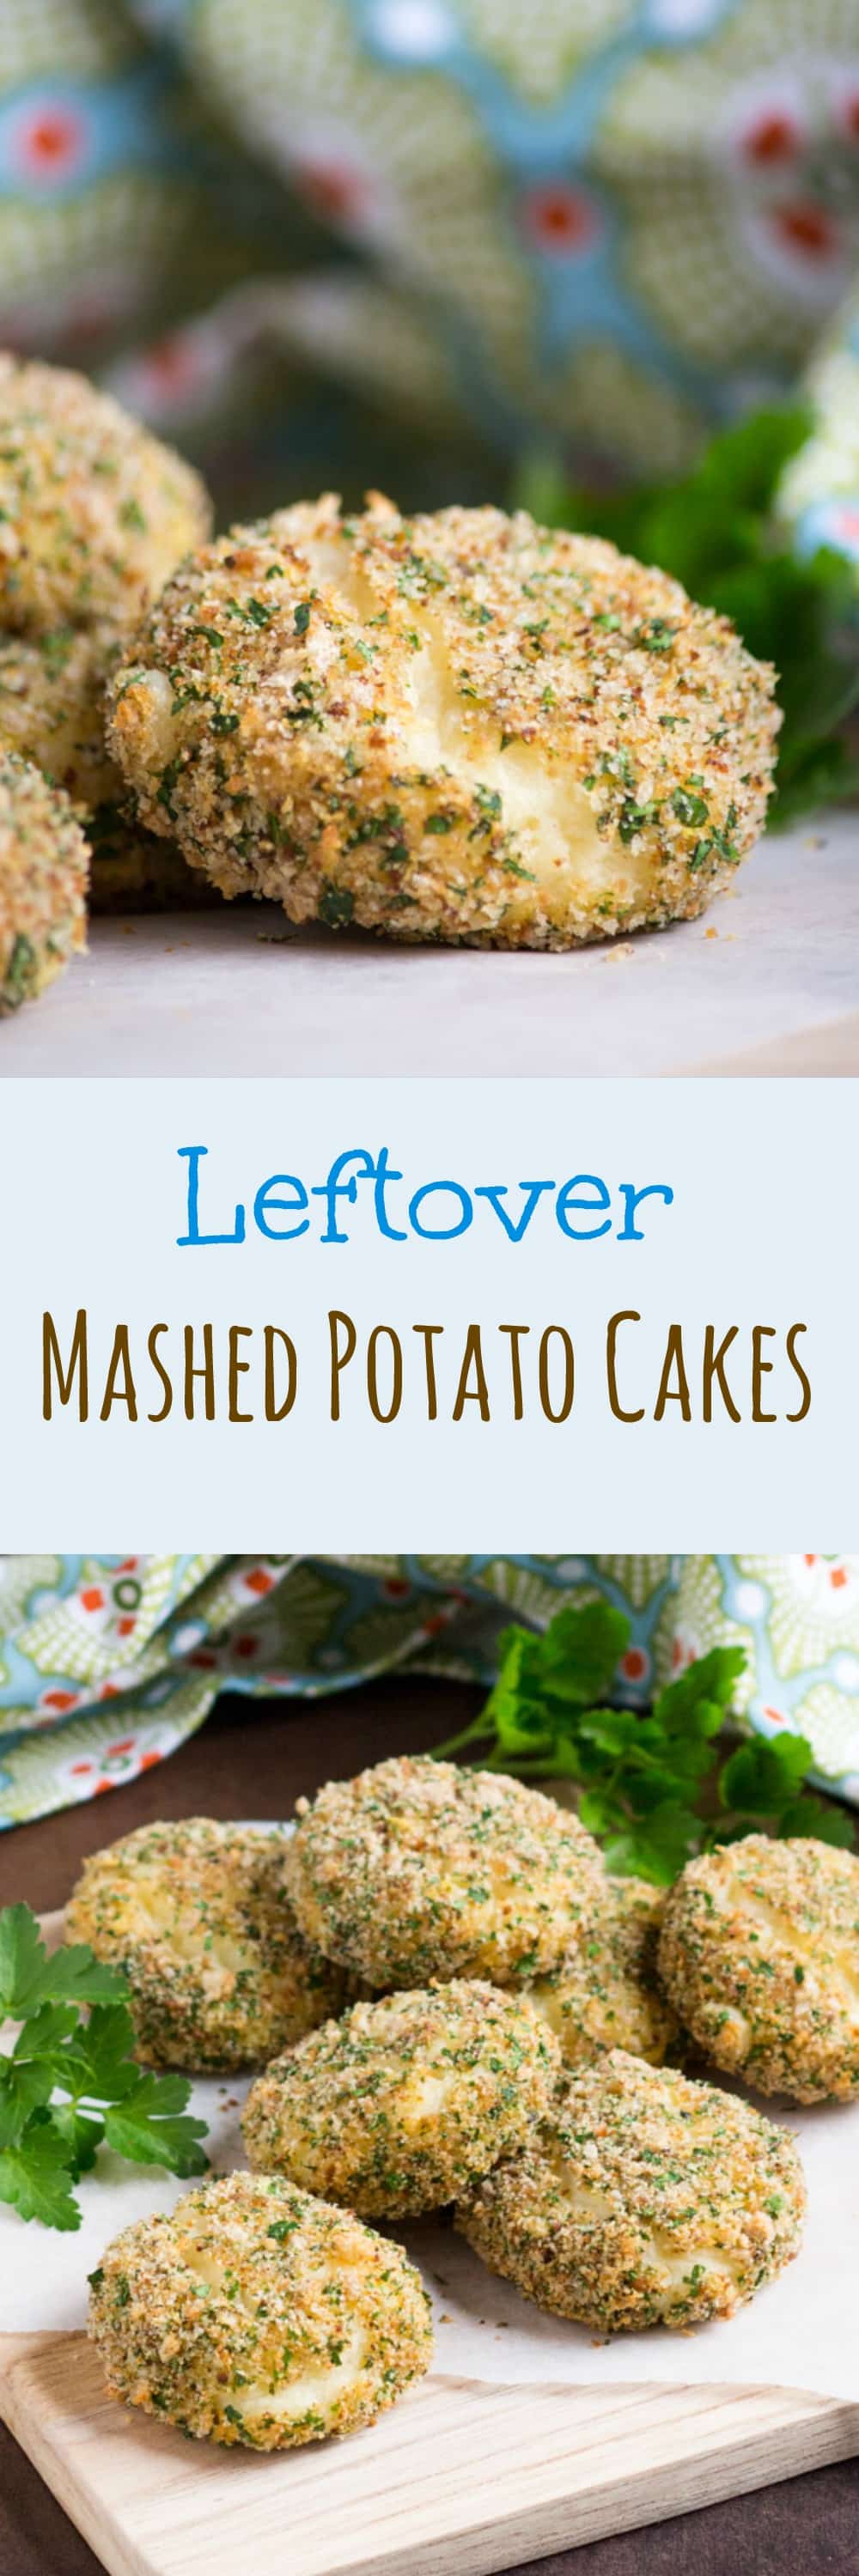 Leftover Mashed Potato Cakes.  A great use for excess mashed potato, but so good you might mash potatoes just to make them.  